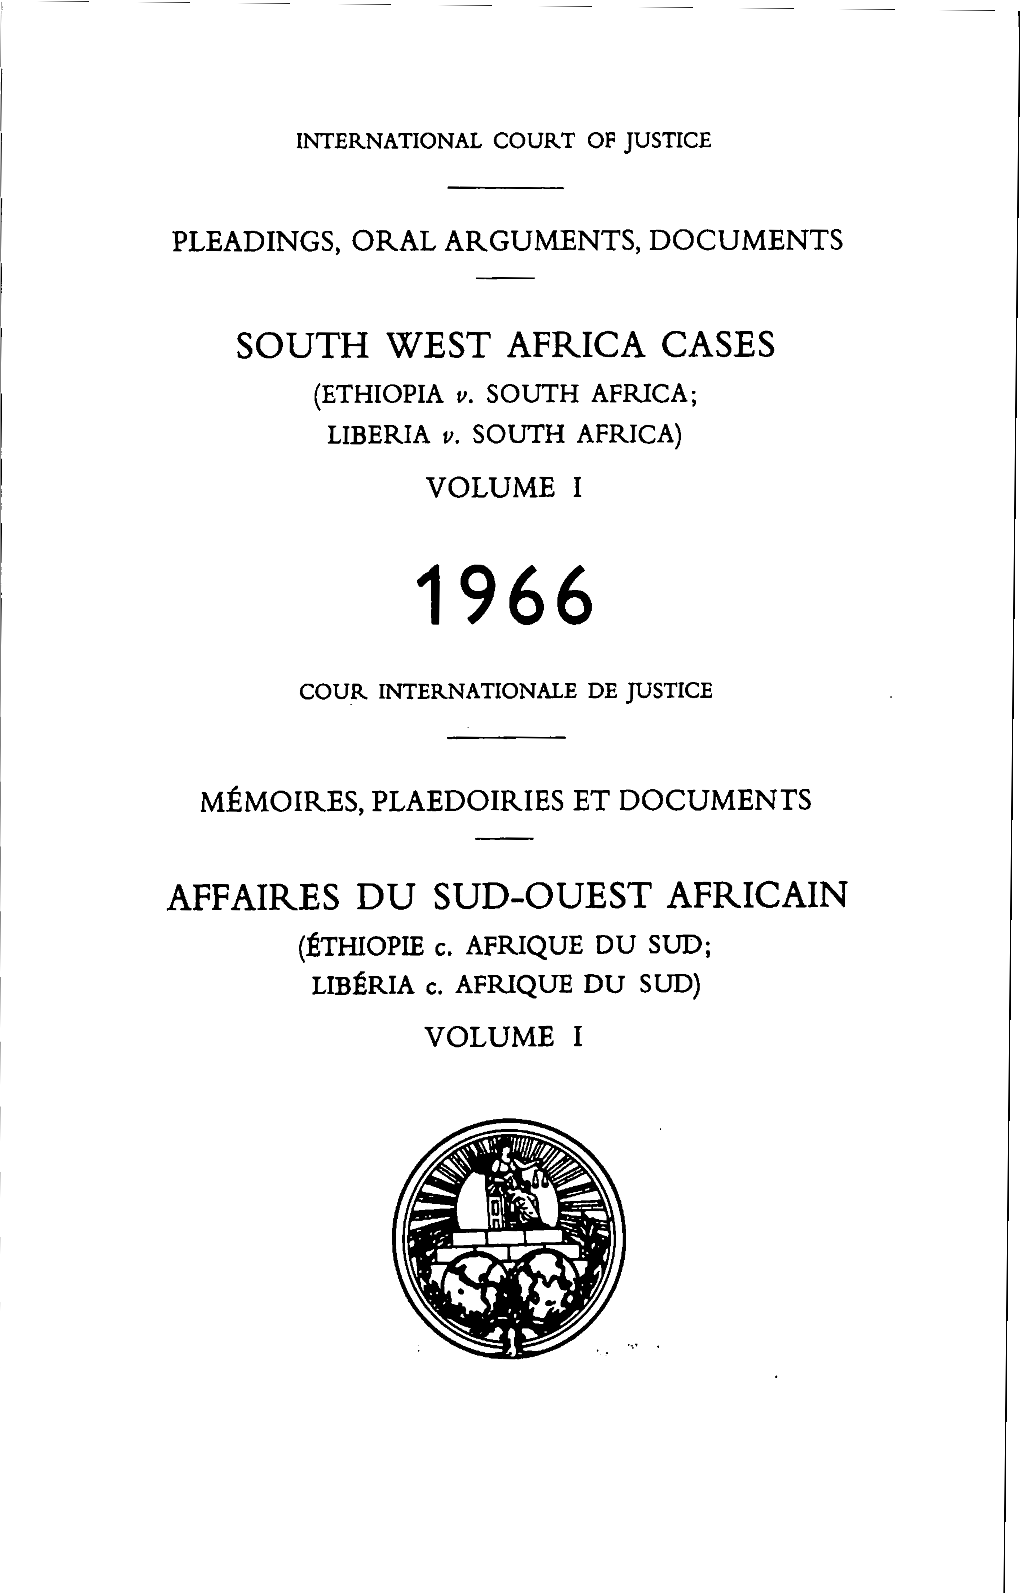 SOUTH WEST AFRICA CASES (ETHIOPIA V